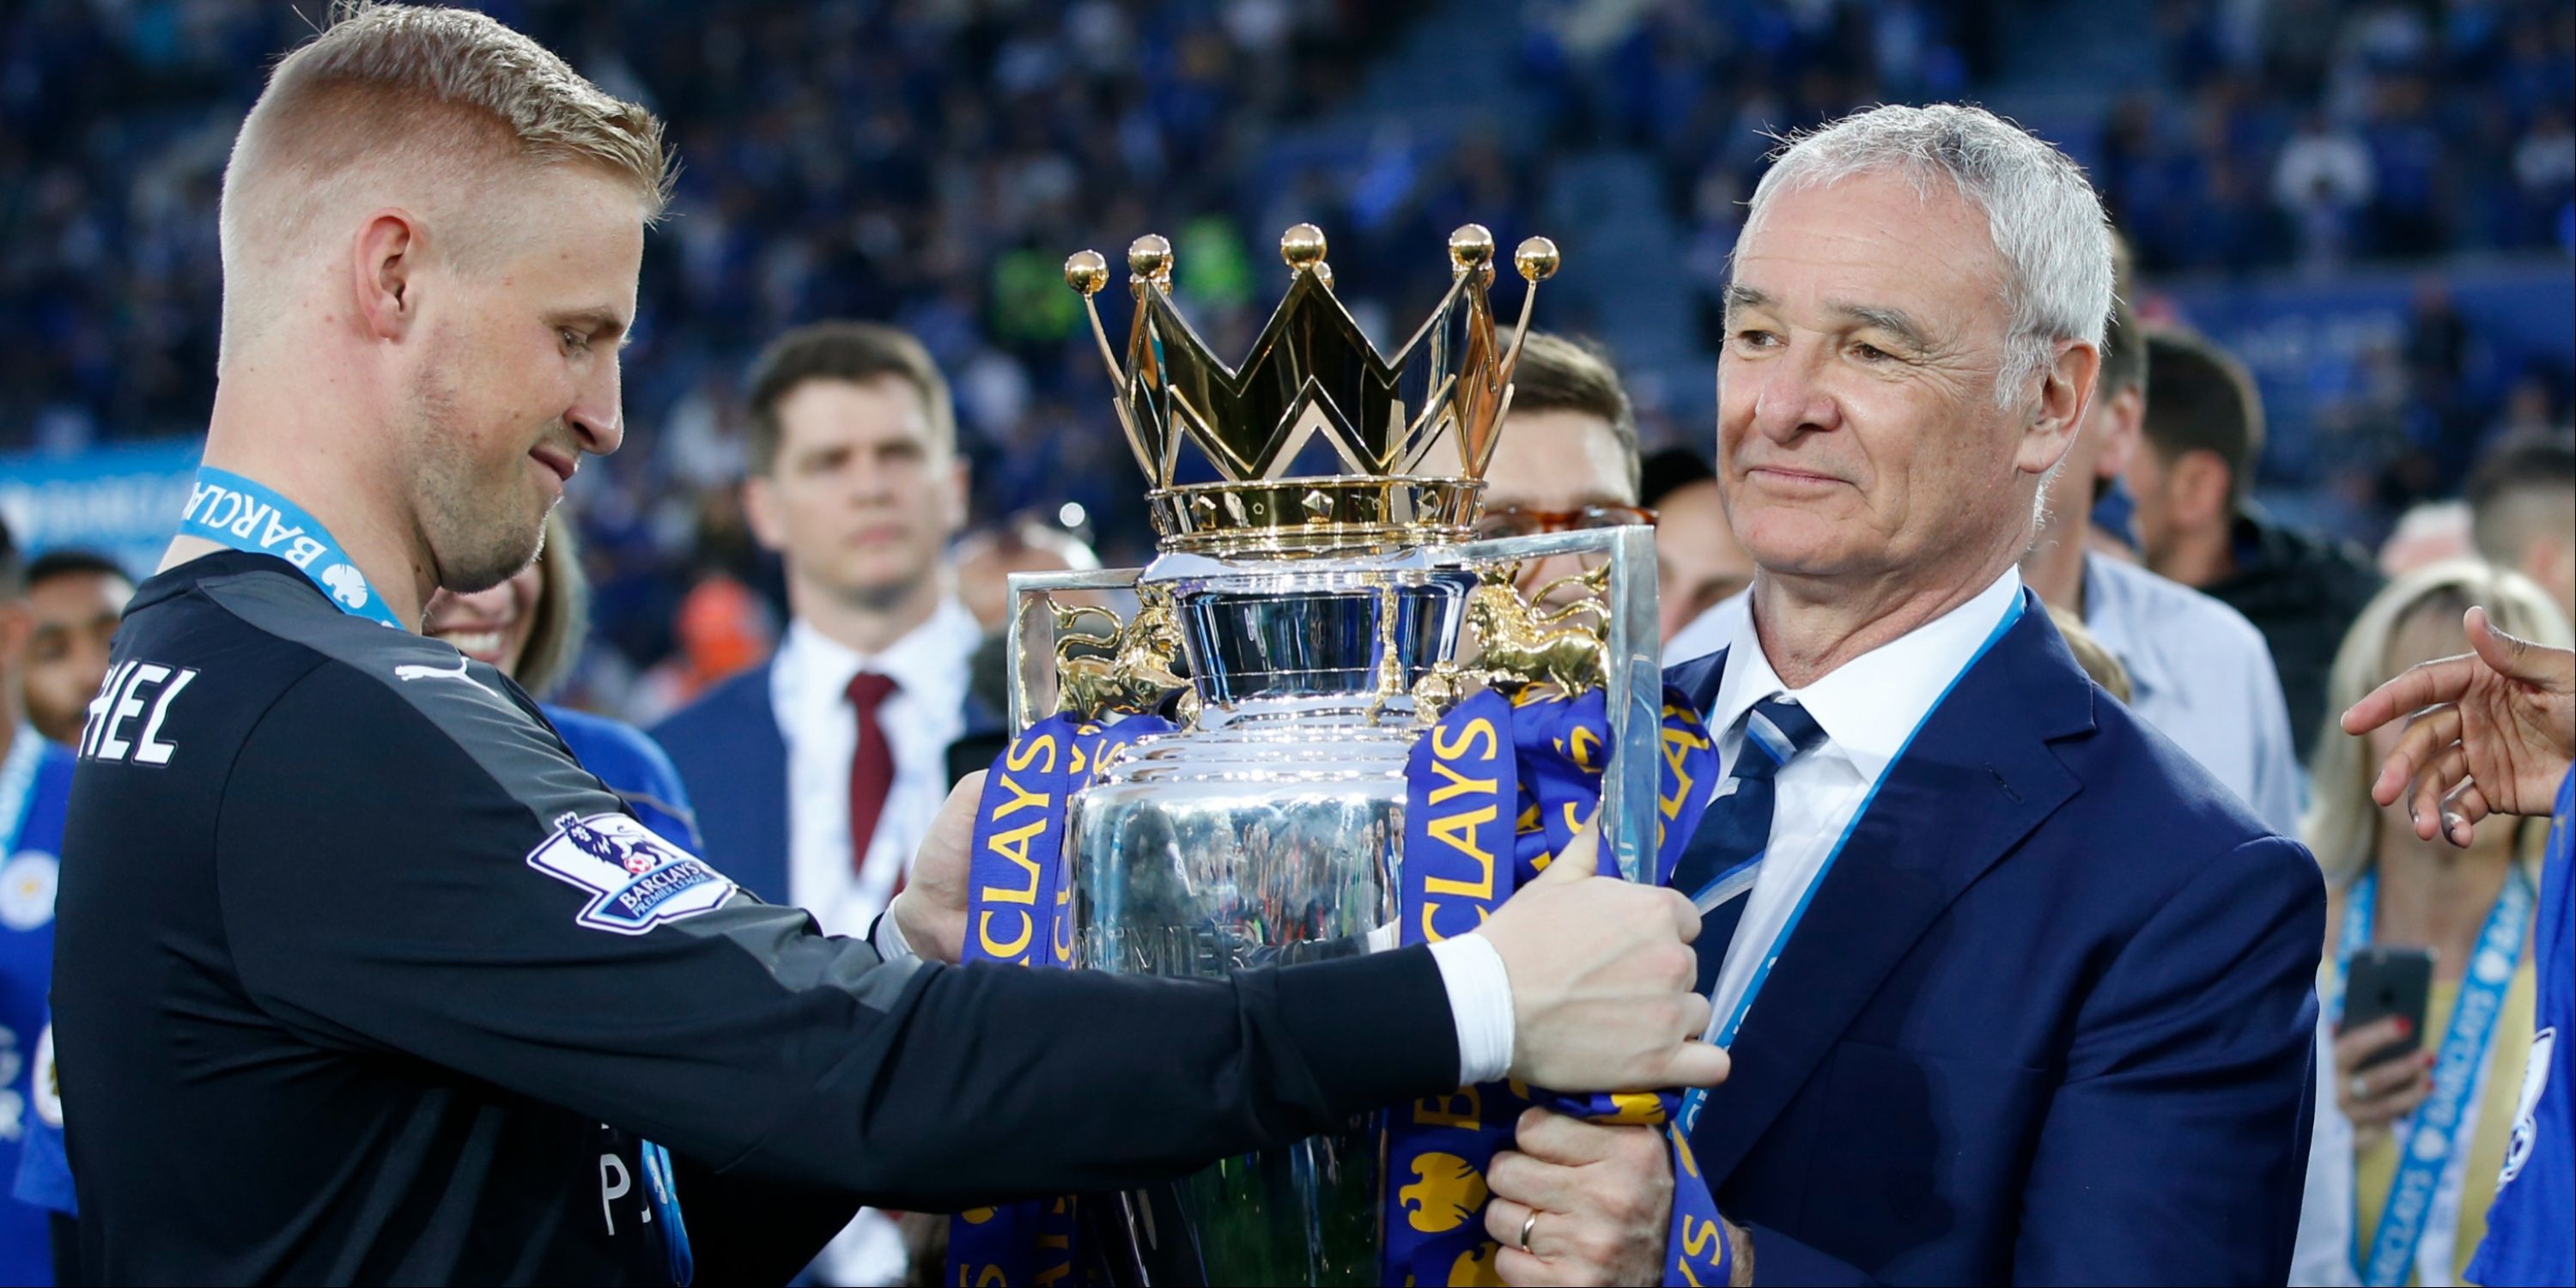 Leicester City manager Claudio Ranieri lifts the trophy with Kasper Schmeichel